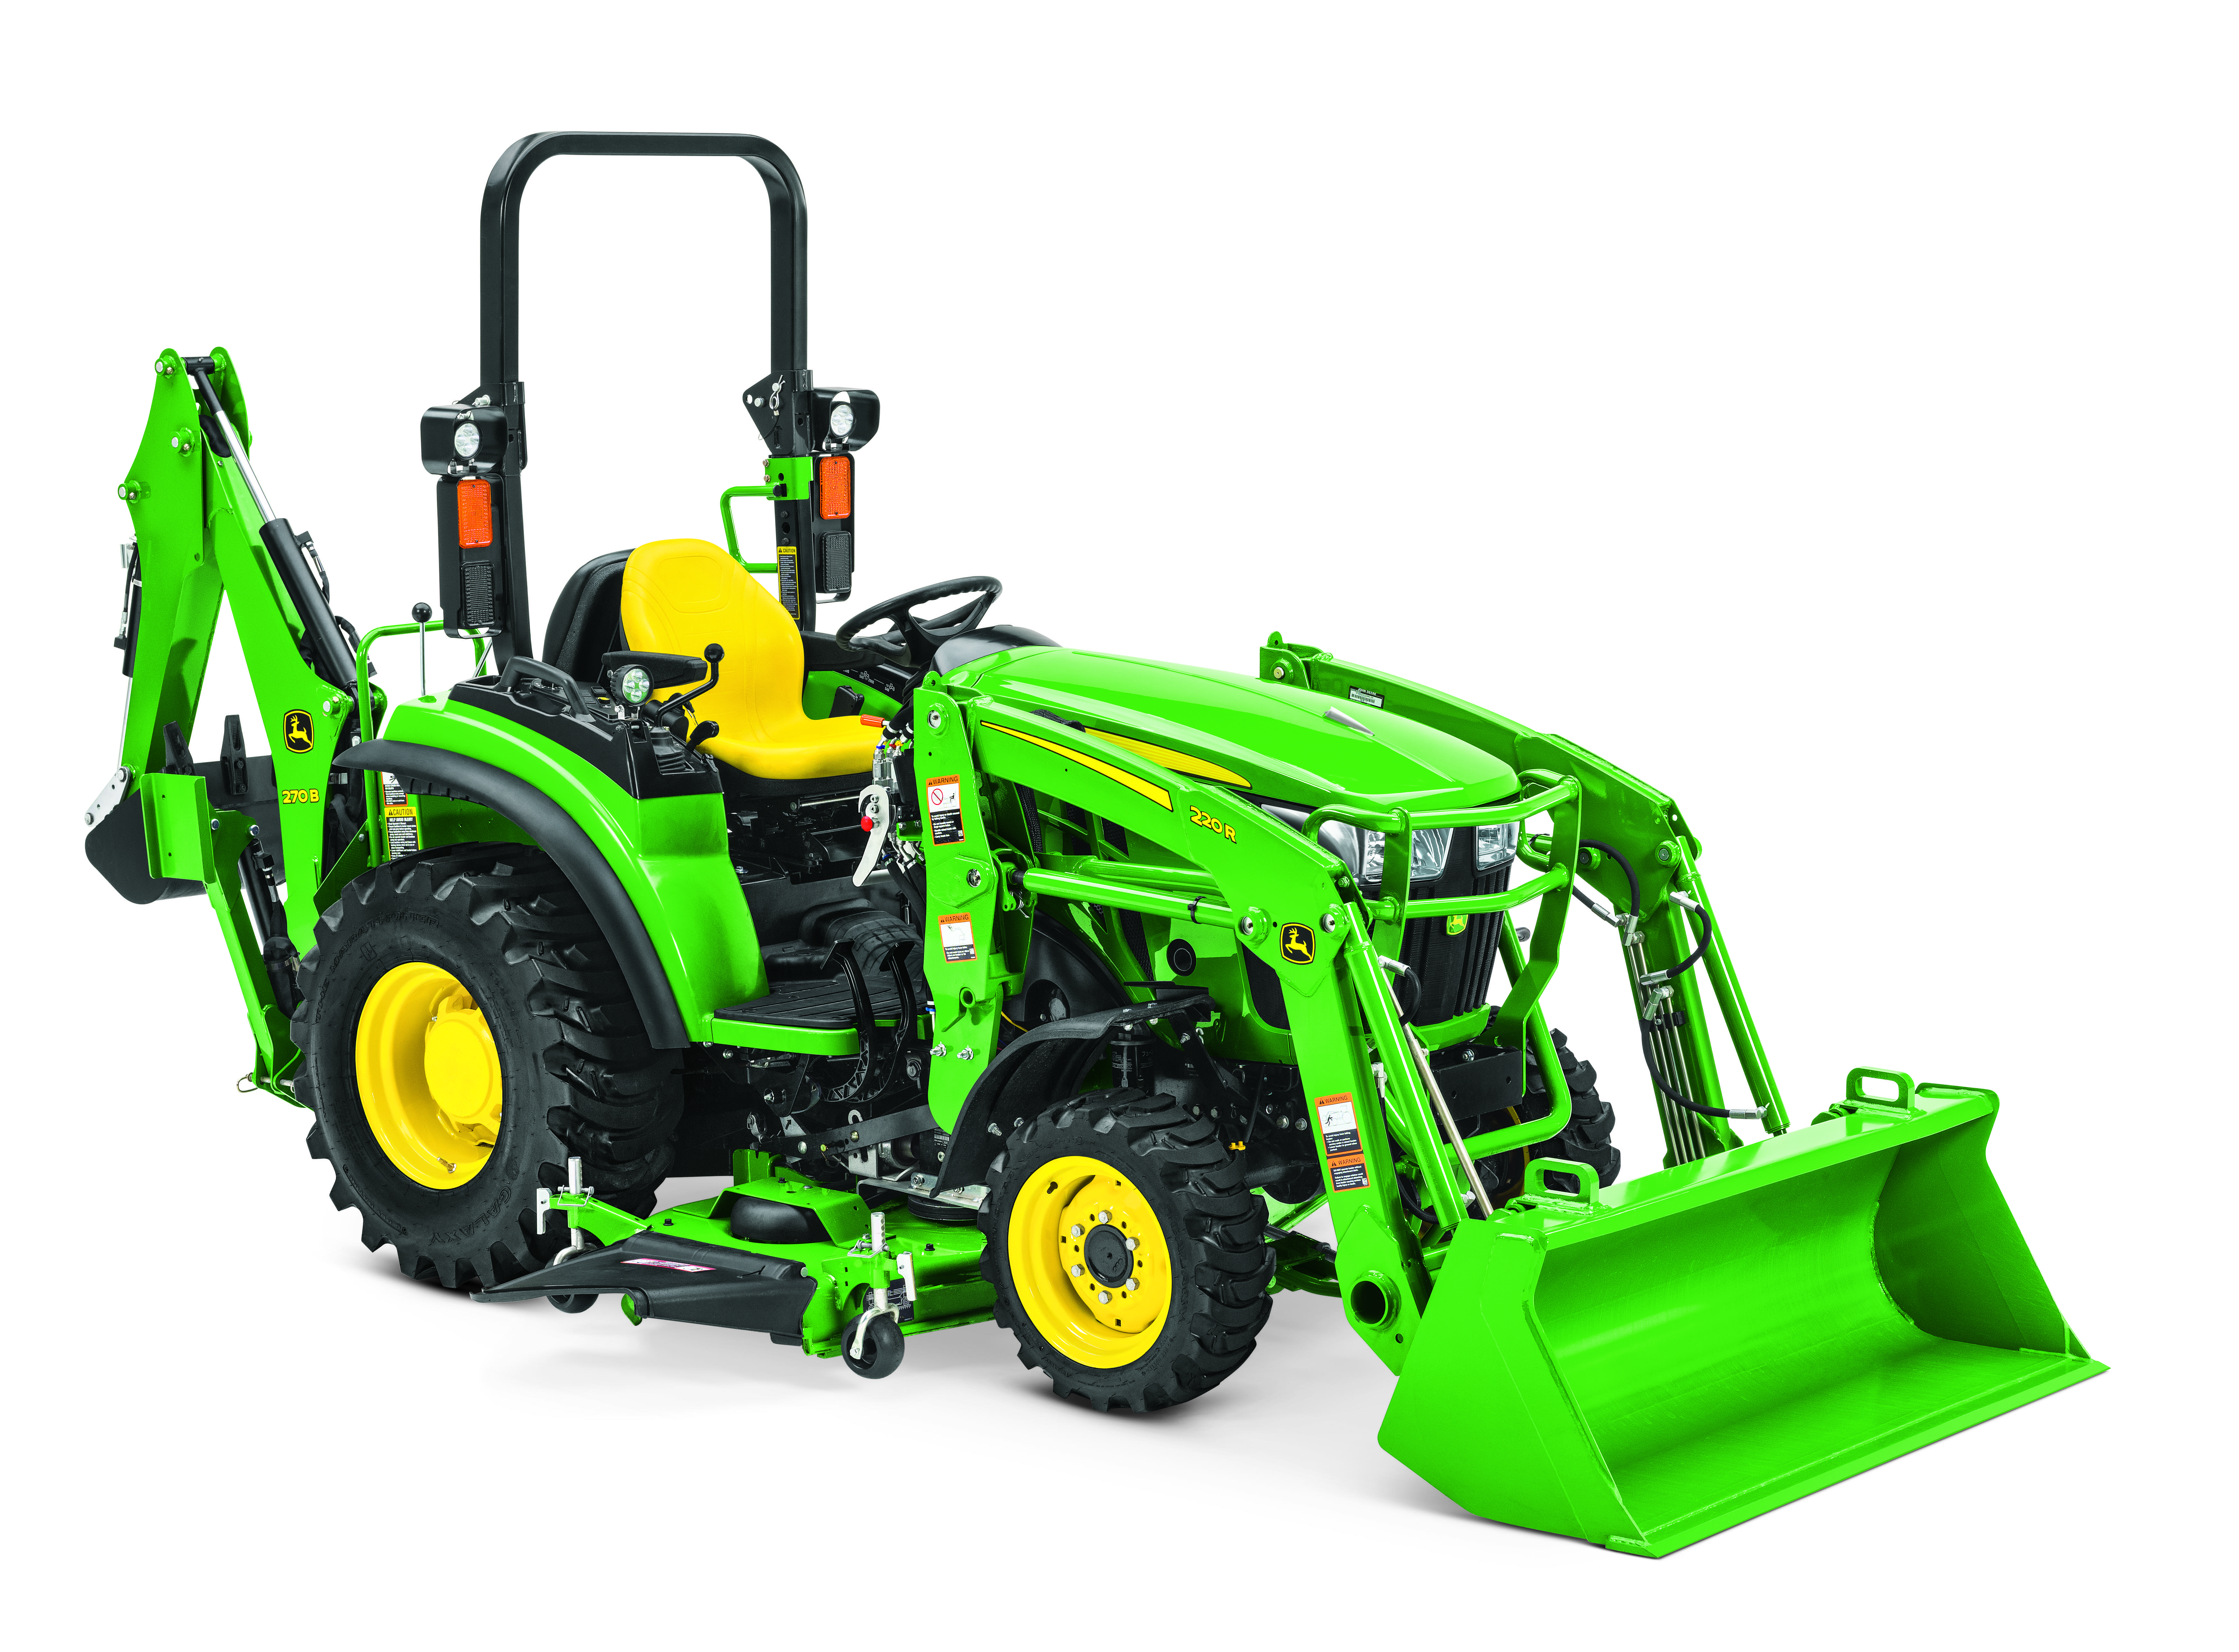 John Deere is adding new compact utility tractor models 2032R, 2038R ...